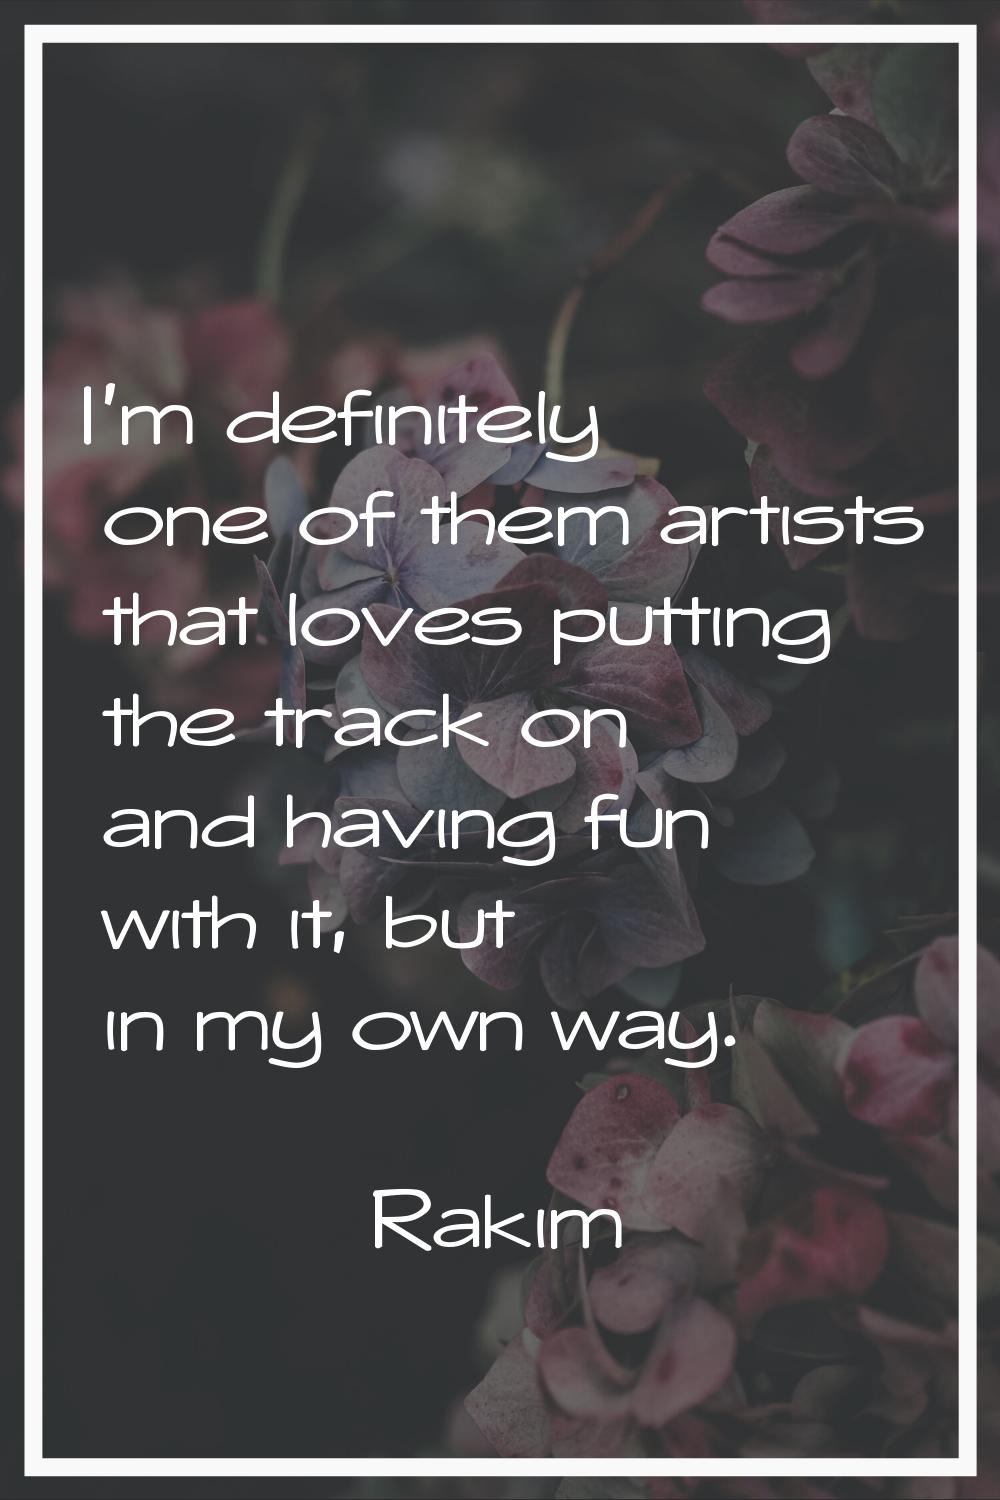 I'm definitely one of them artists that loves putting the track on and having fun with it, but in m